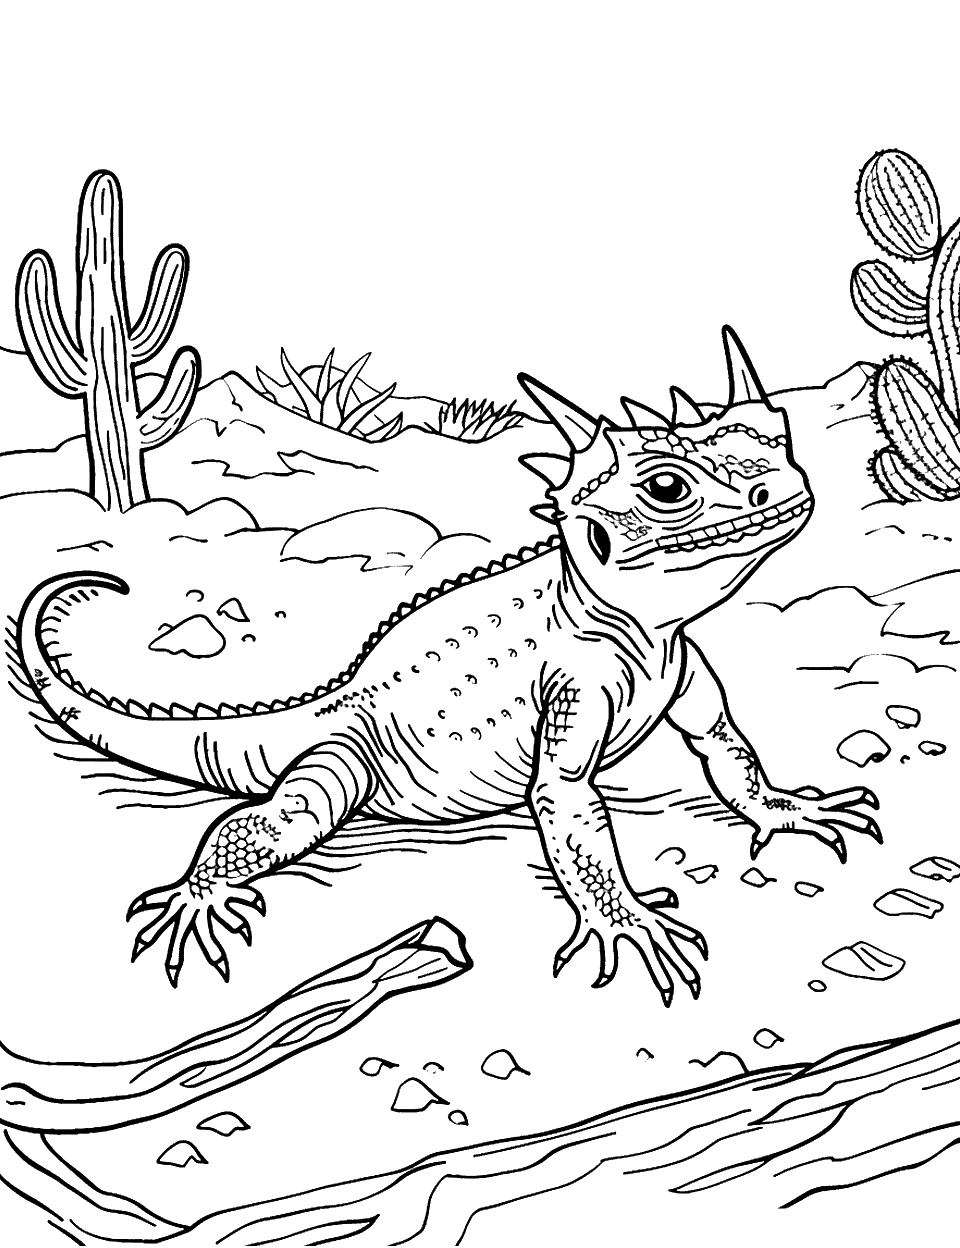 Horned Lizard in the Desert Coloring Page - A horned lizard on a sparse desert ground with a few scattered cacti around.